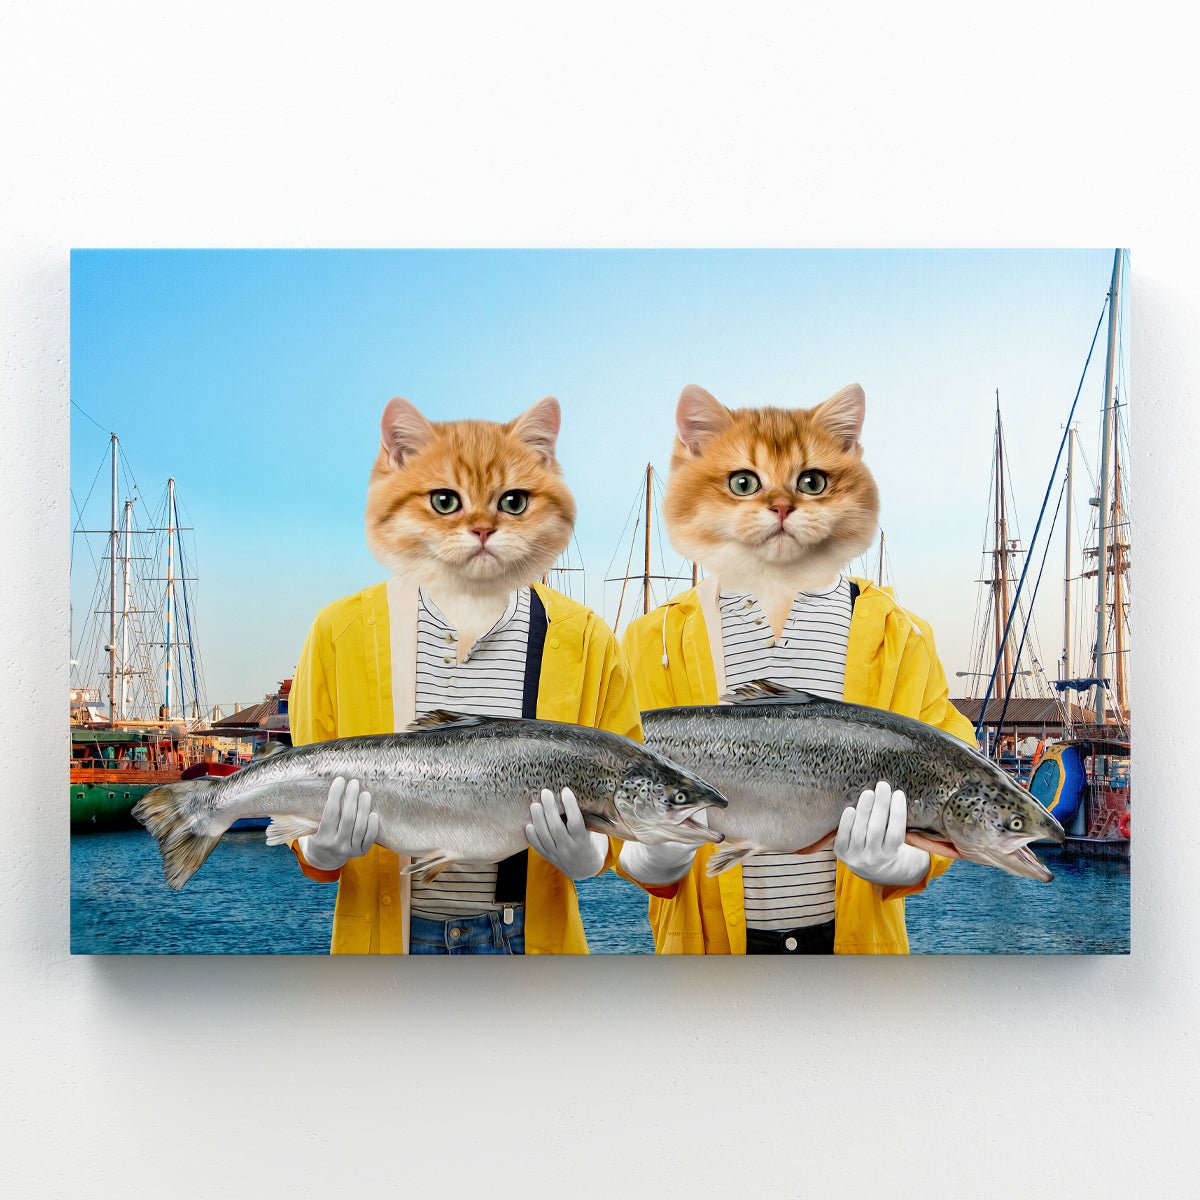 The Fishers: Custom Pet Canvas - Paw & Glory - #pet portraits# - #dog portraits# - #pet portraits uk#paw and glory, custom pet portrait canvas,pet art canvas, custom dog canvas, dog pictures on canvas, dog canvas print, personalized pet canvas